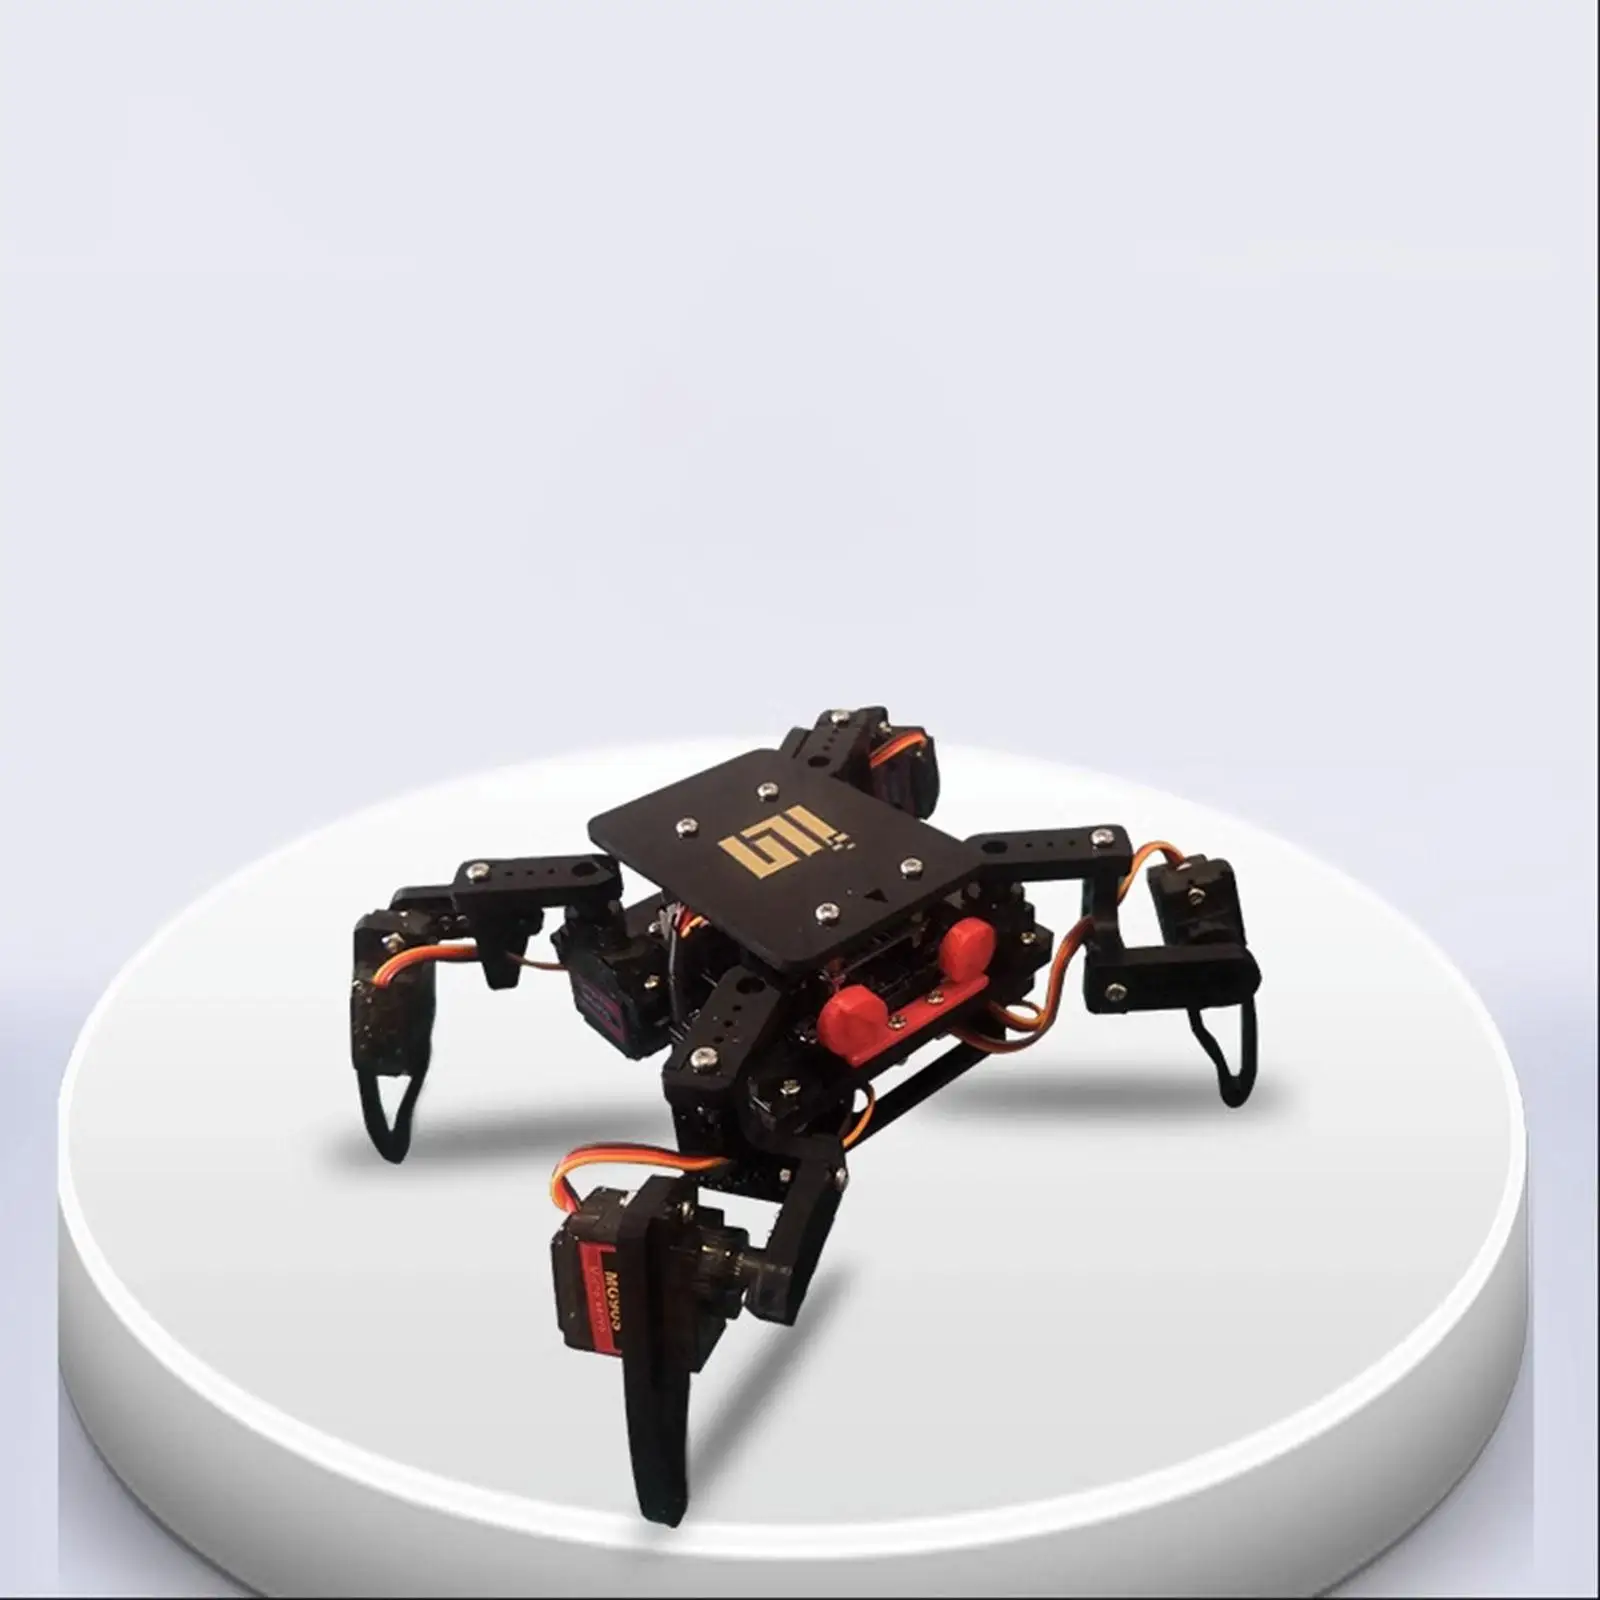 Quadruped Robot Kits Compact Walking Crawling Twisting Programming Robot Toy Project for Electronic Competition Teaching Aids